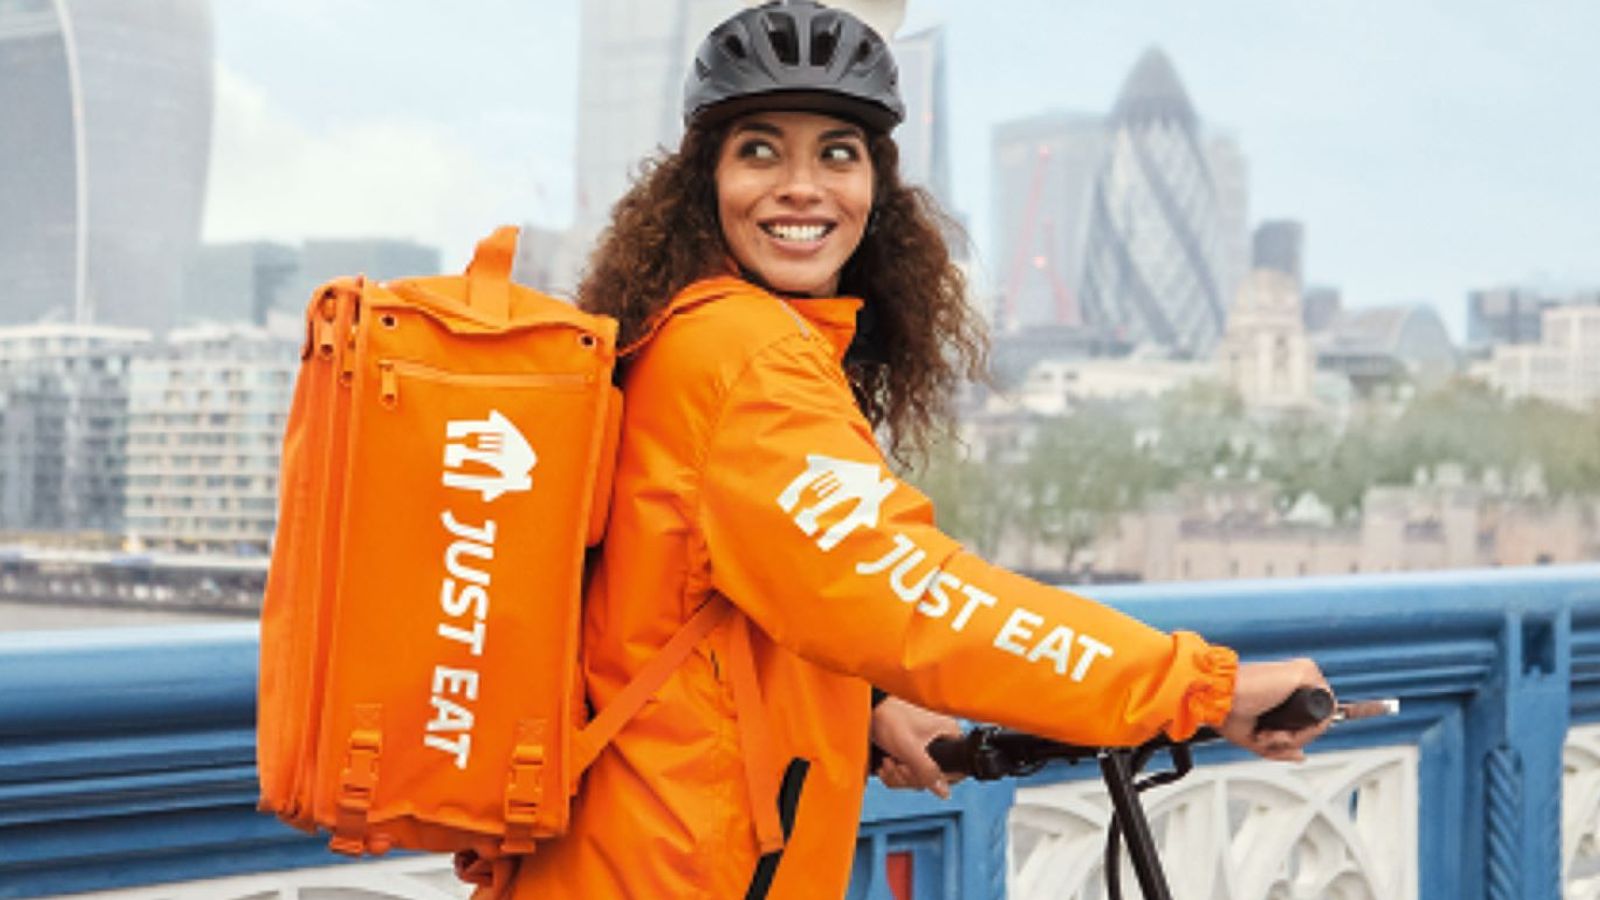 Just Eat to axe around 1,700 delivery worker jobs